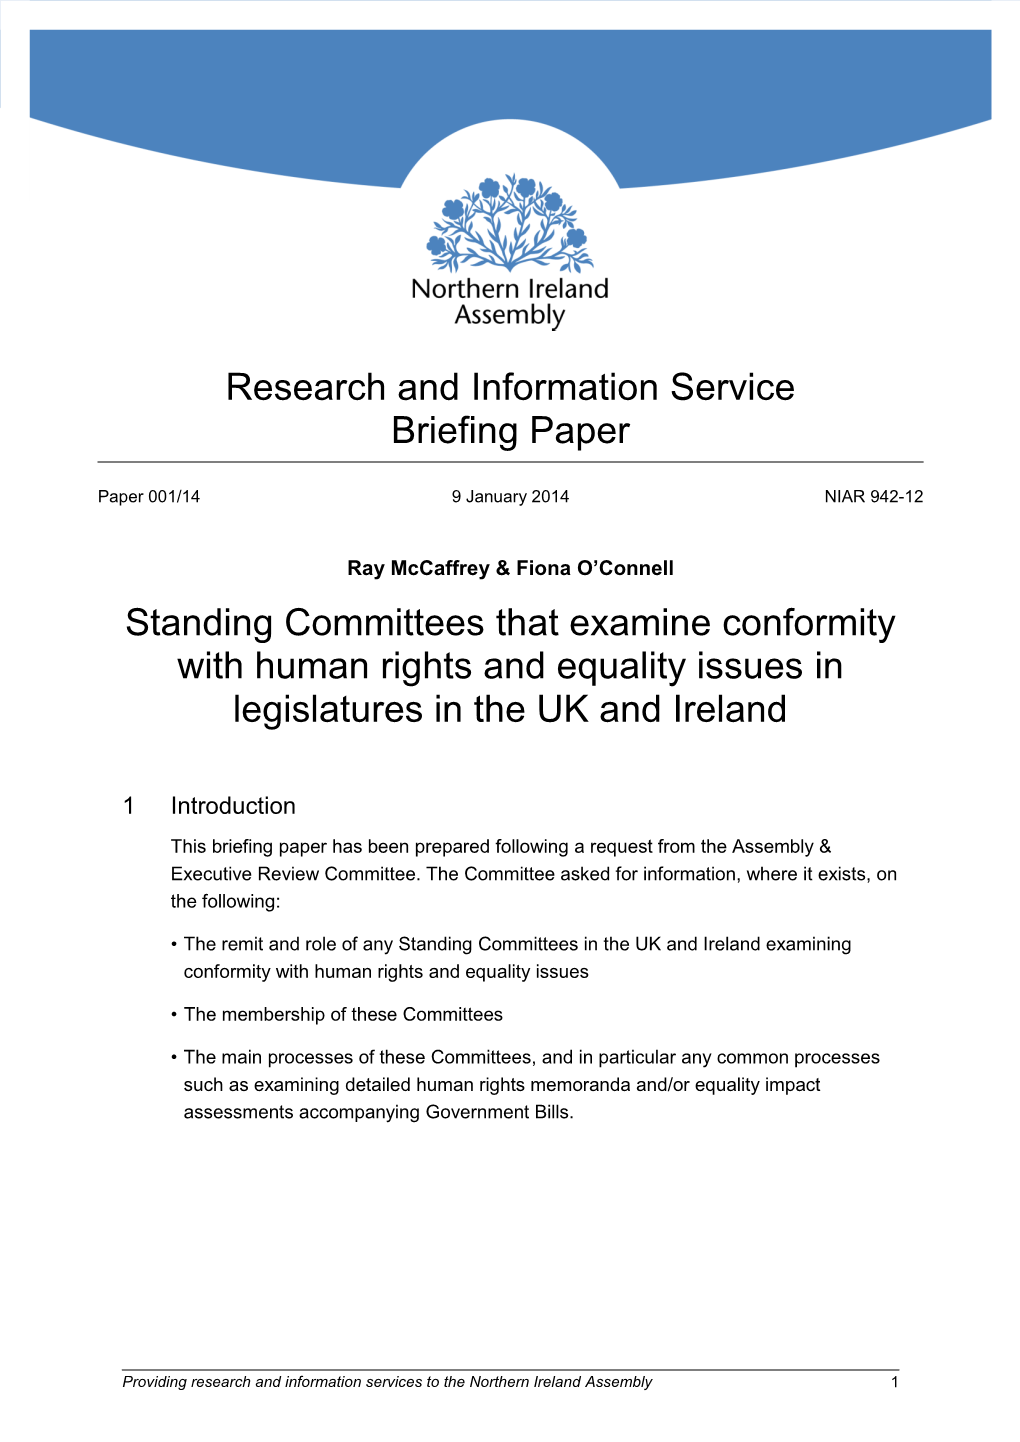 Standing Committees That Examine Conformity with Human Rights and Equality Issues in Legislatures in the UK and Ireland